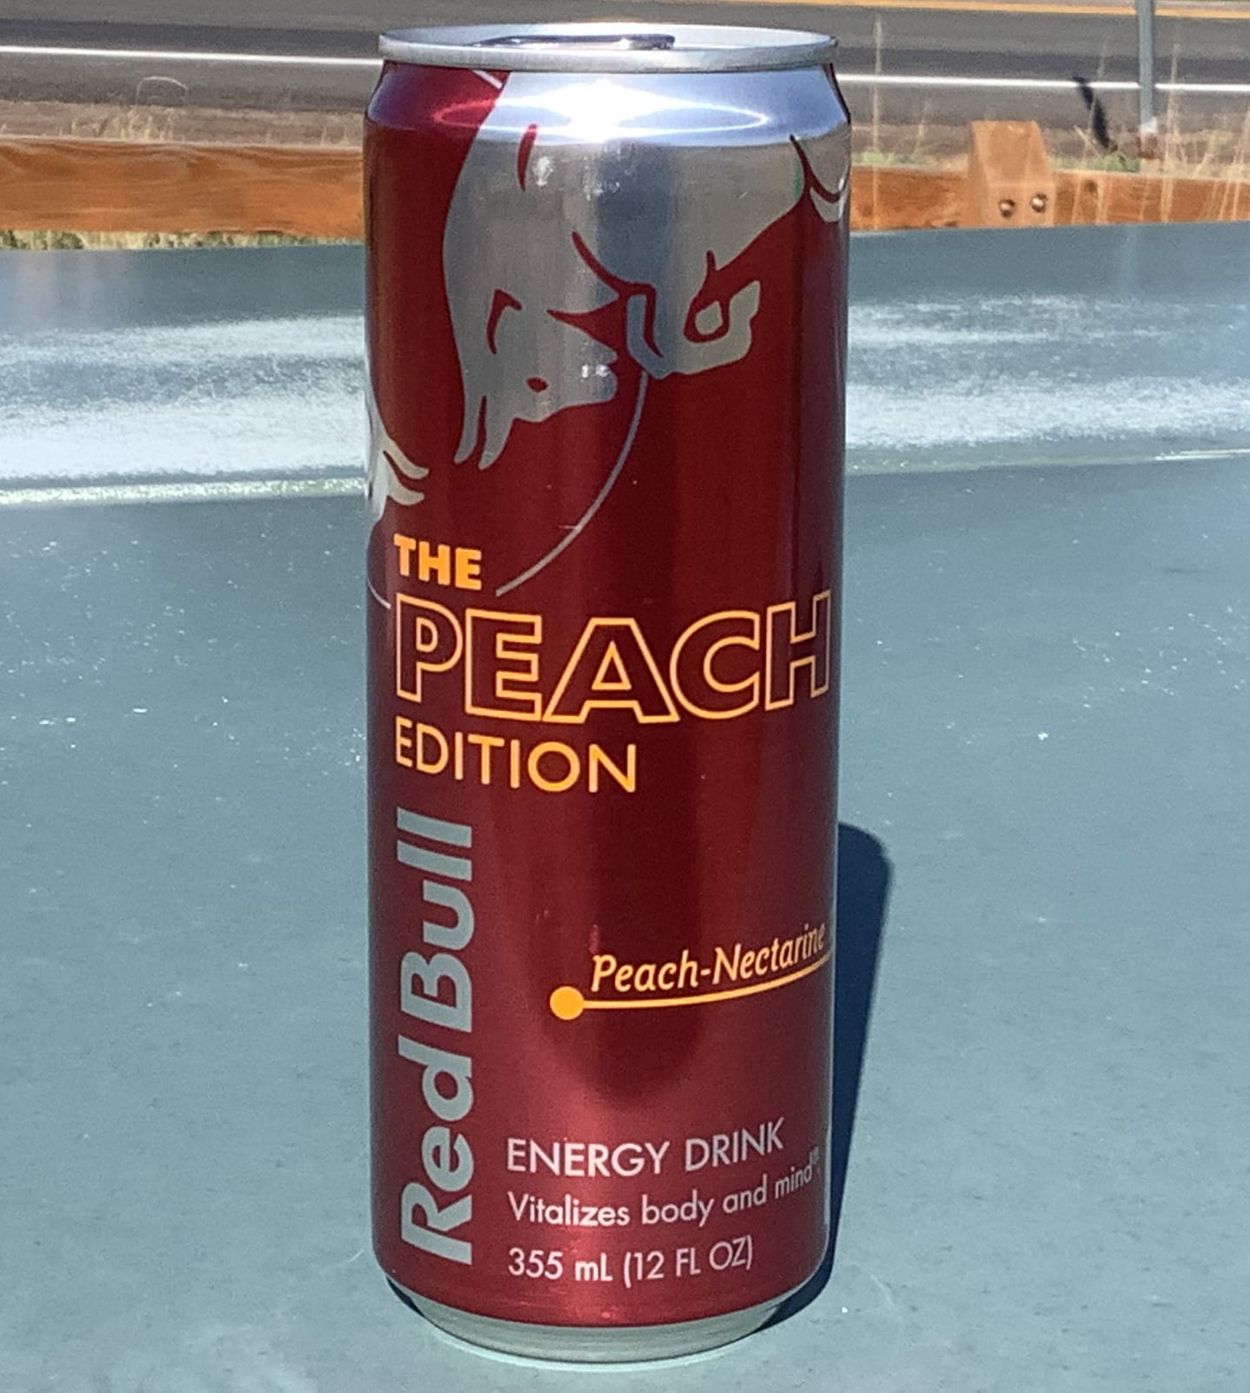 Caffeine and Ingredients of Red Bull Peach Edition (Full Information)